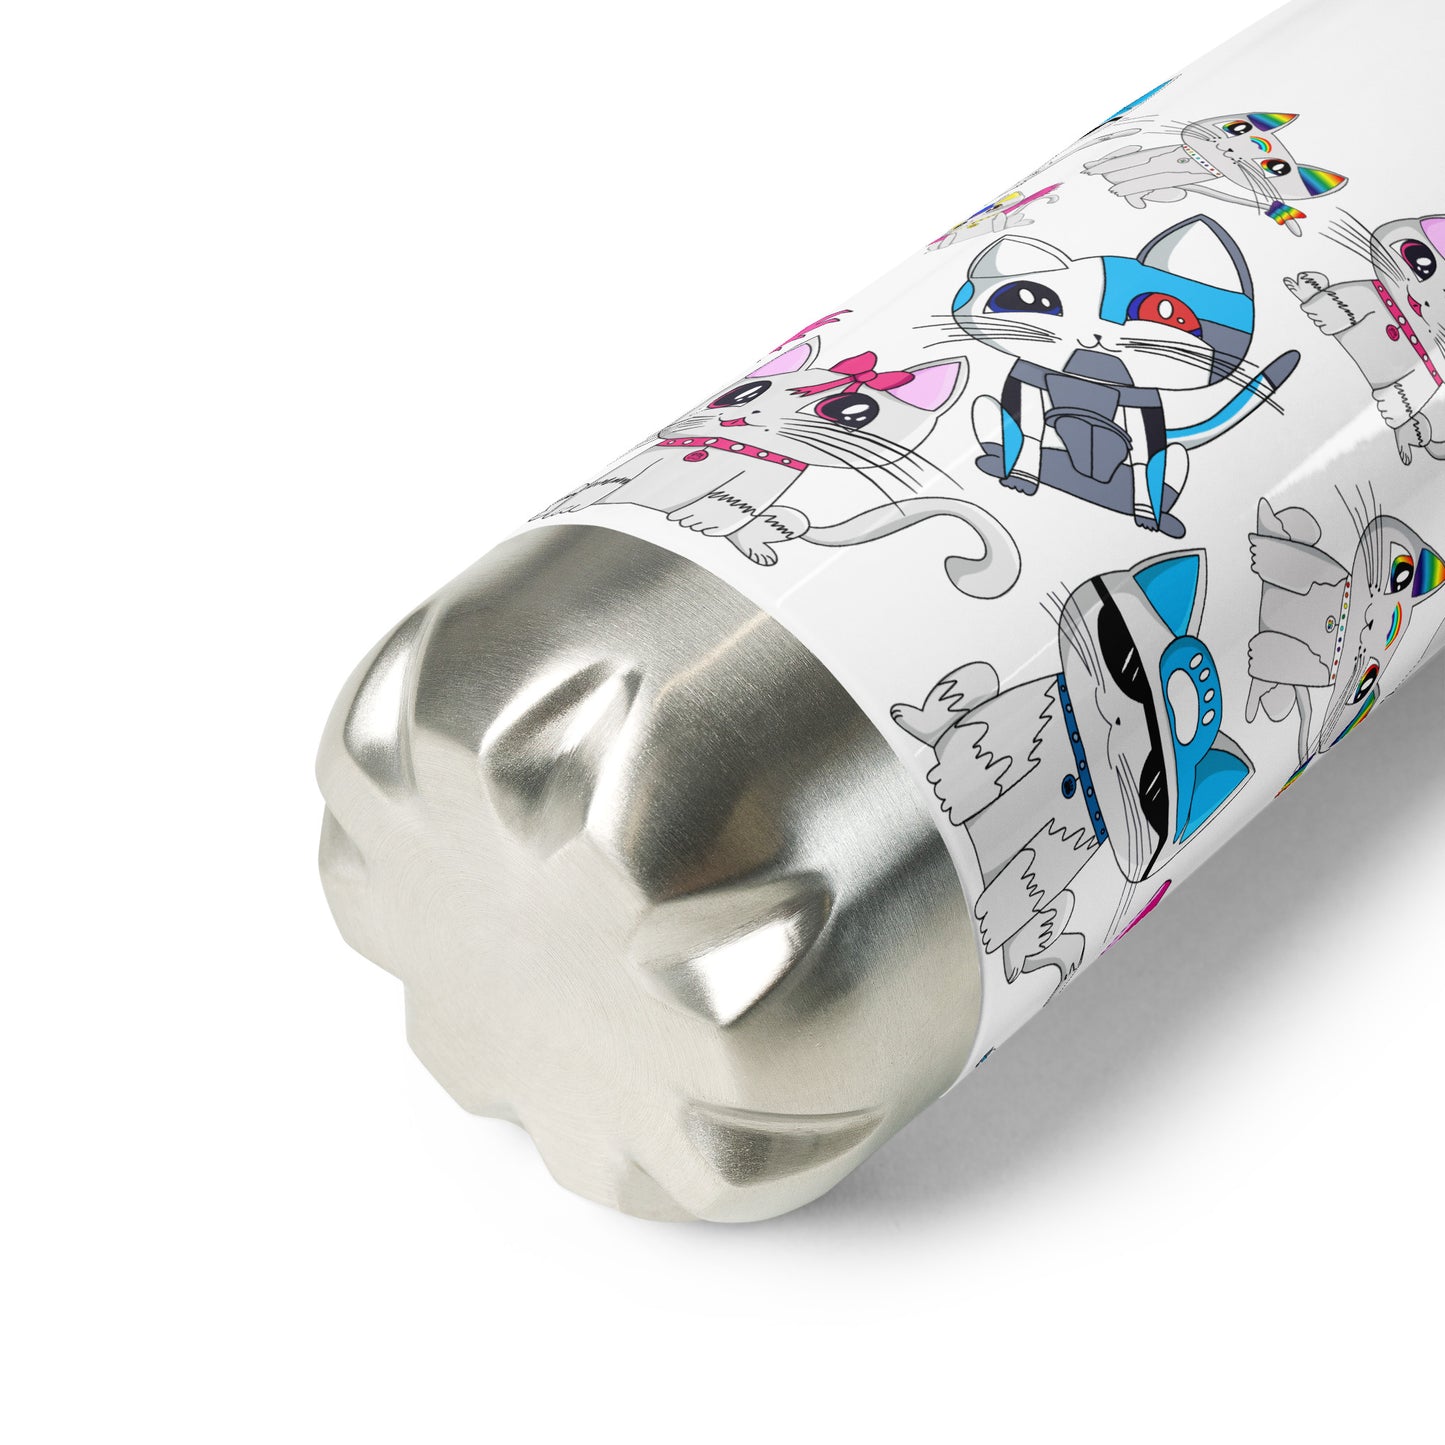 Ami's Cats Stainless Steel Water Bottle